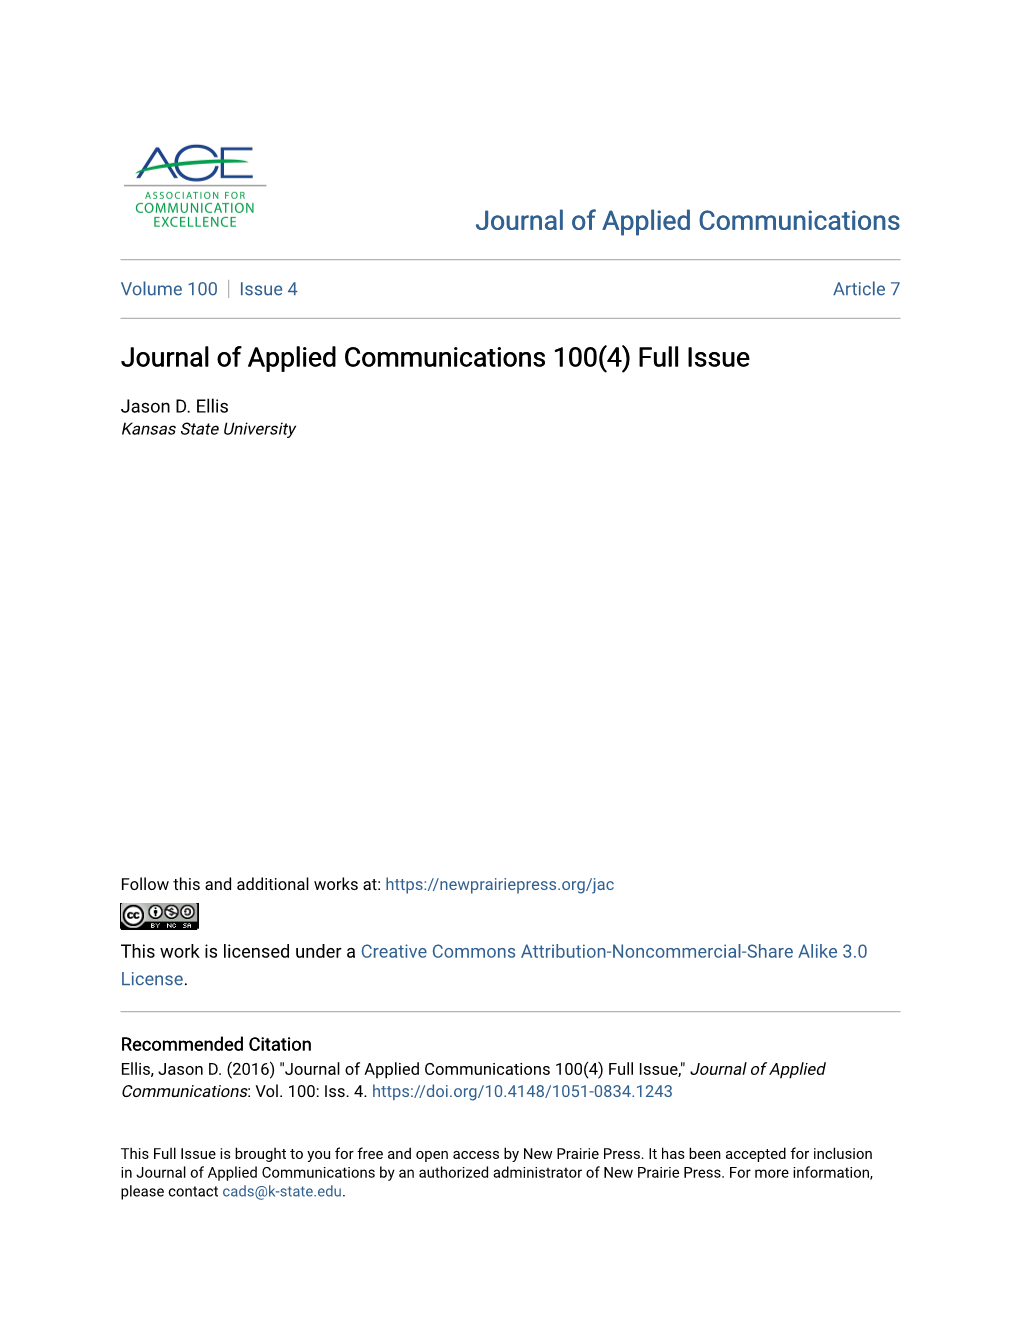 Journal of Applied Communications 100(4) Full Issue